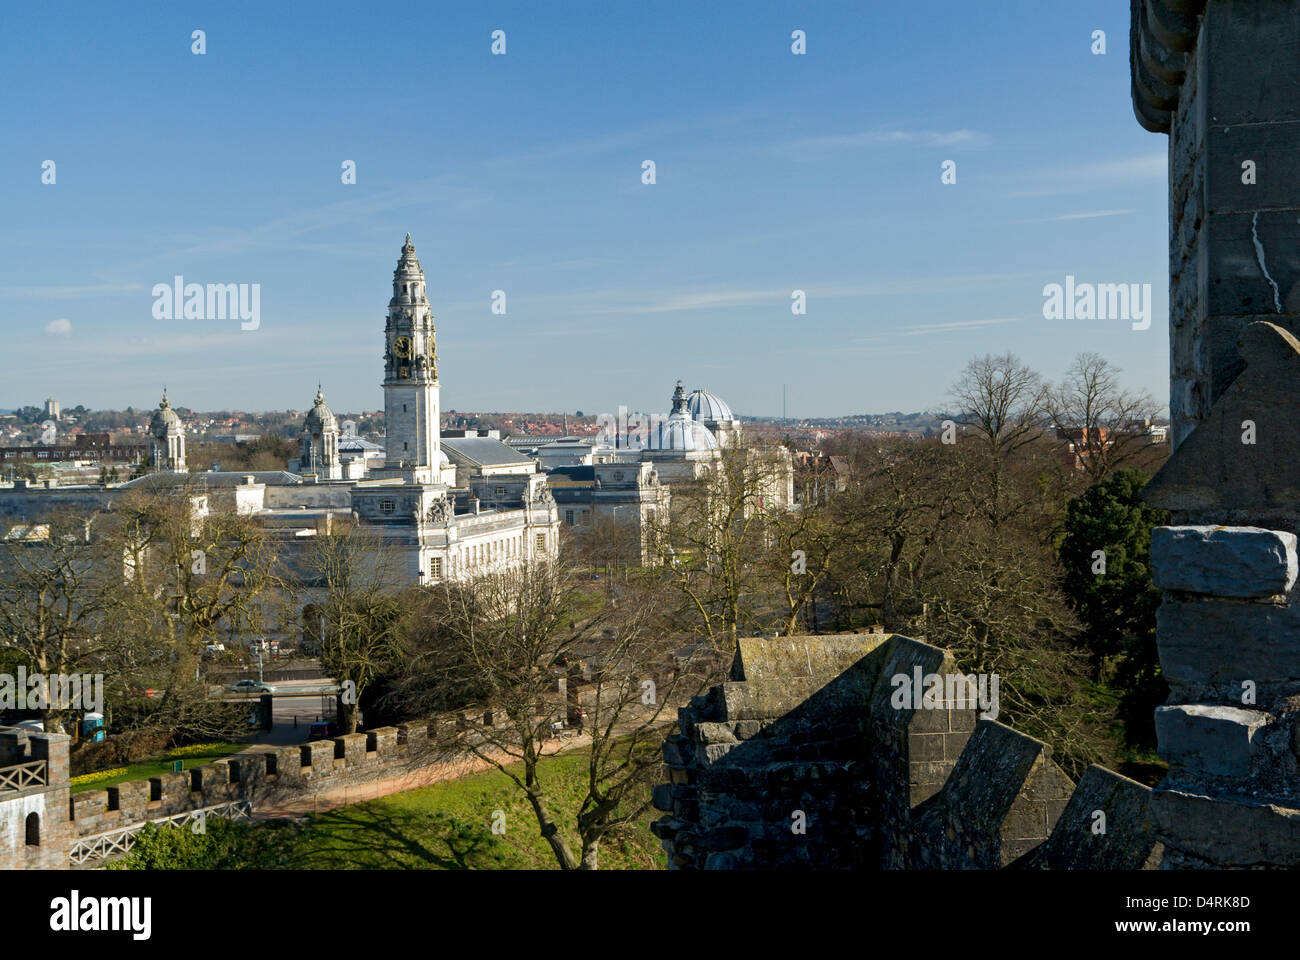 cardiff civic centre from the tower of cardiff castle wales Stock Photo